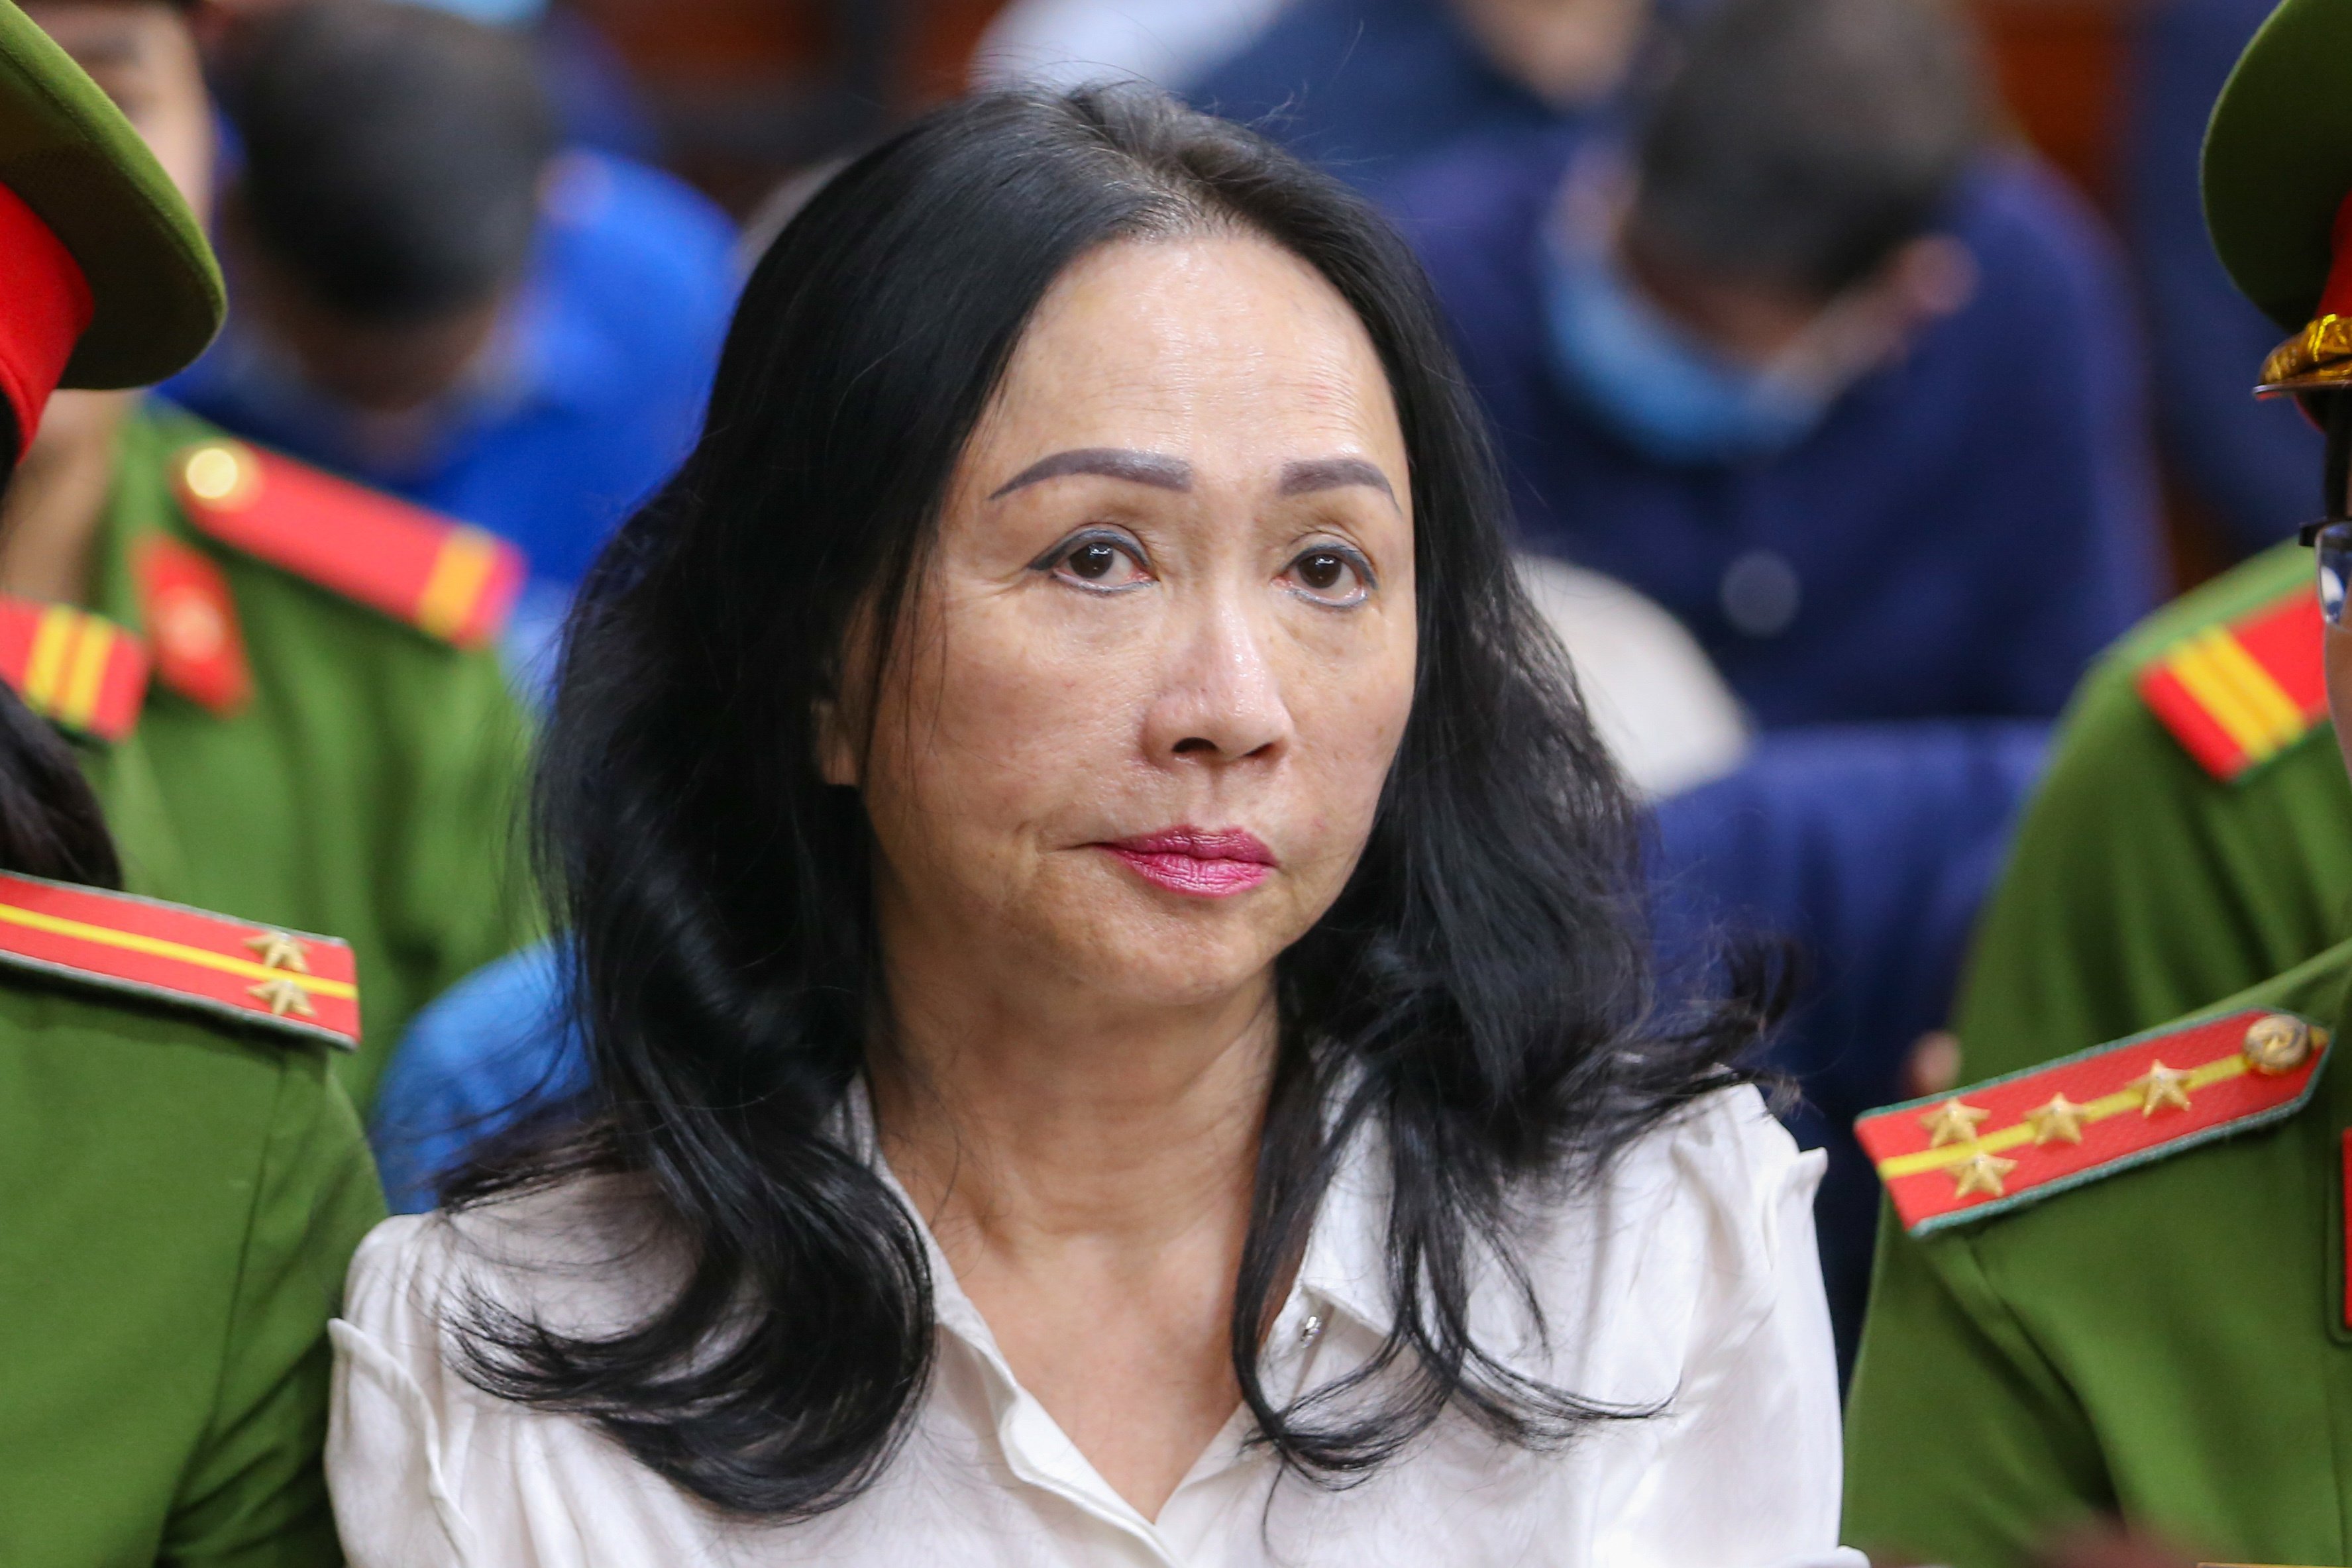 Truong My Lan, chairwoman of Van Thinh Phat Holdings, during her trial at the Ho Chi Minh City People’s Court on April 11. Photo: EPA-EFE